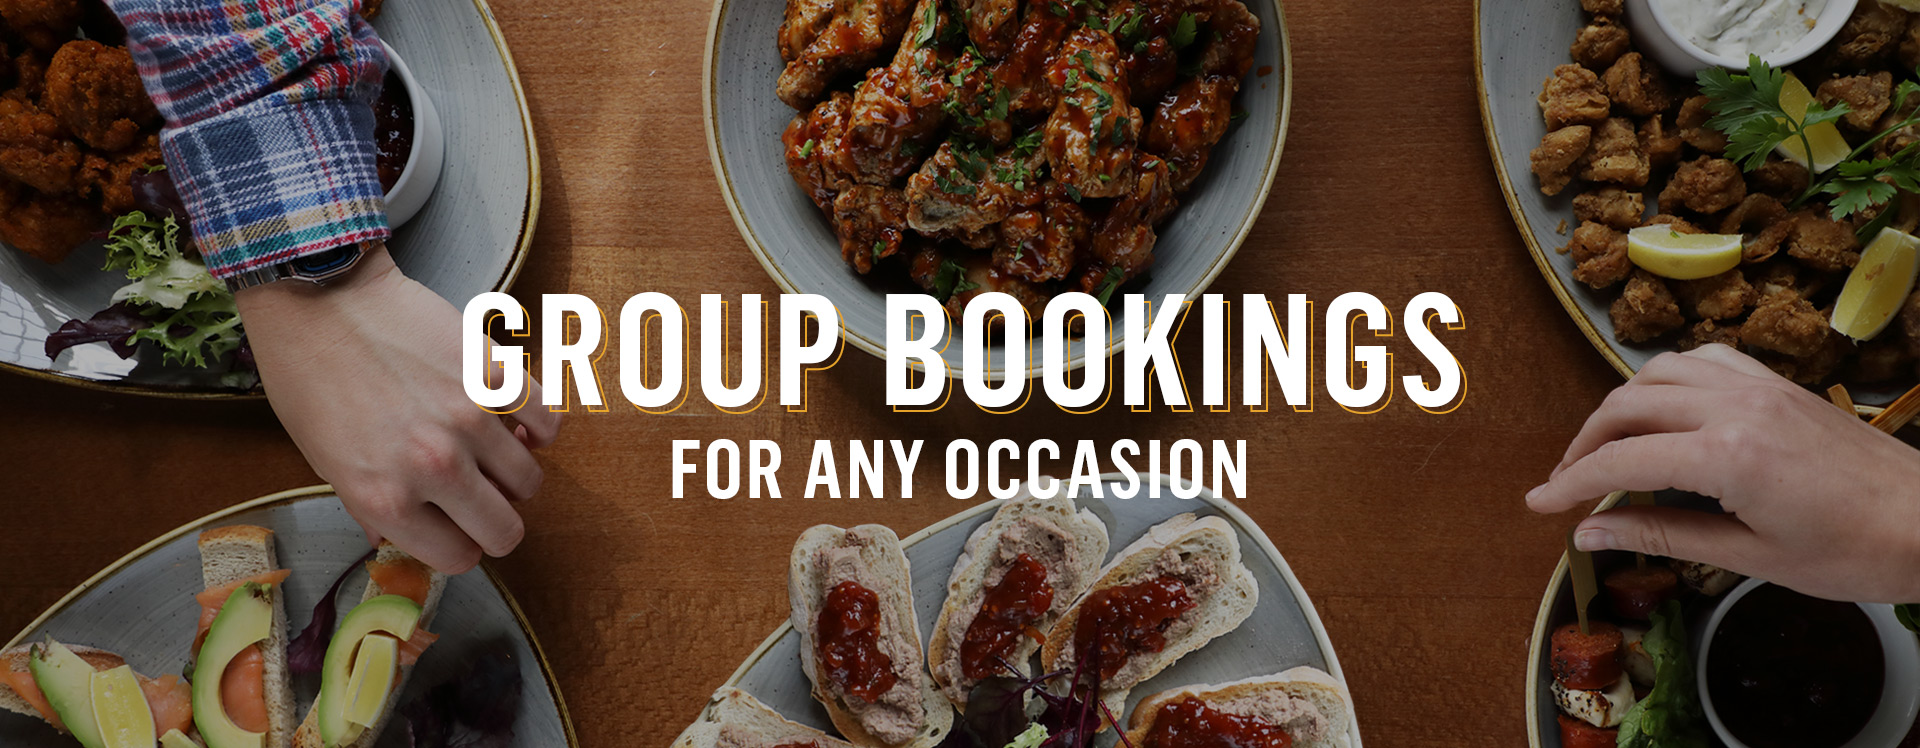 Group Bookings at Flying Horse